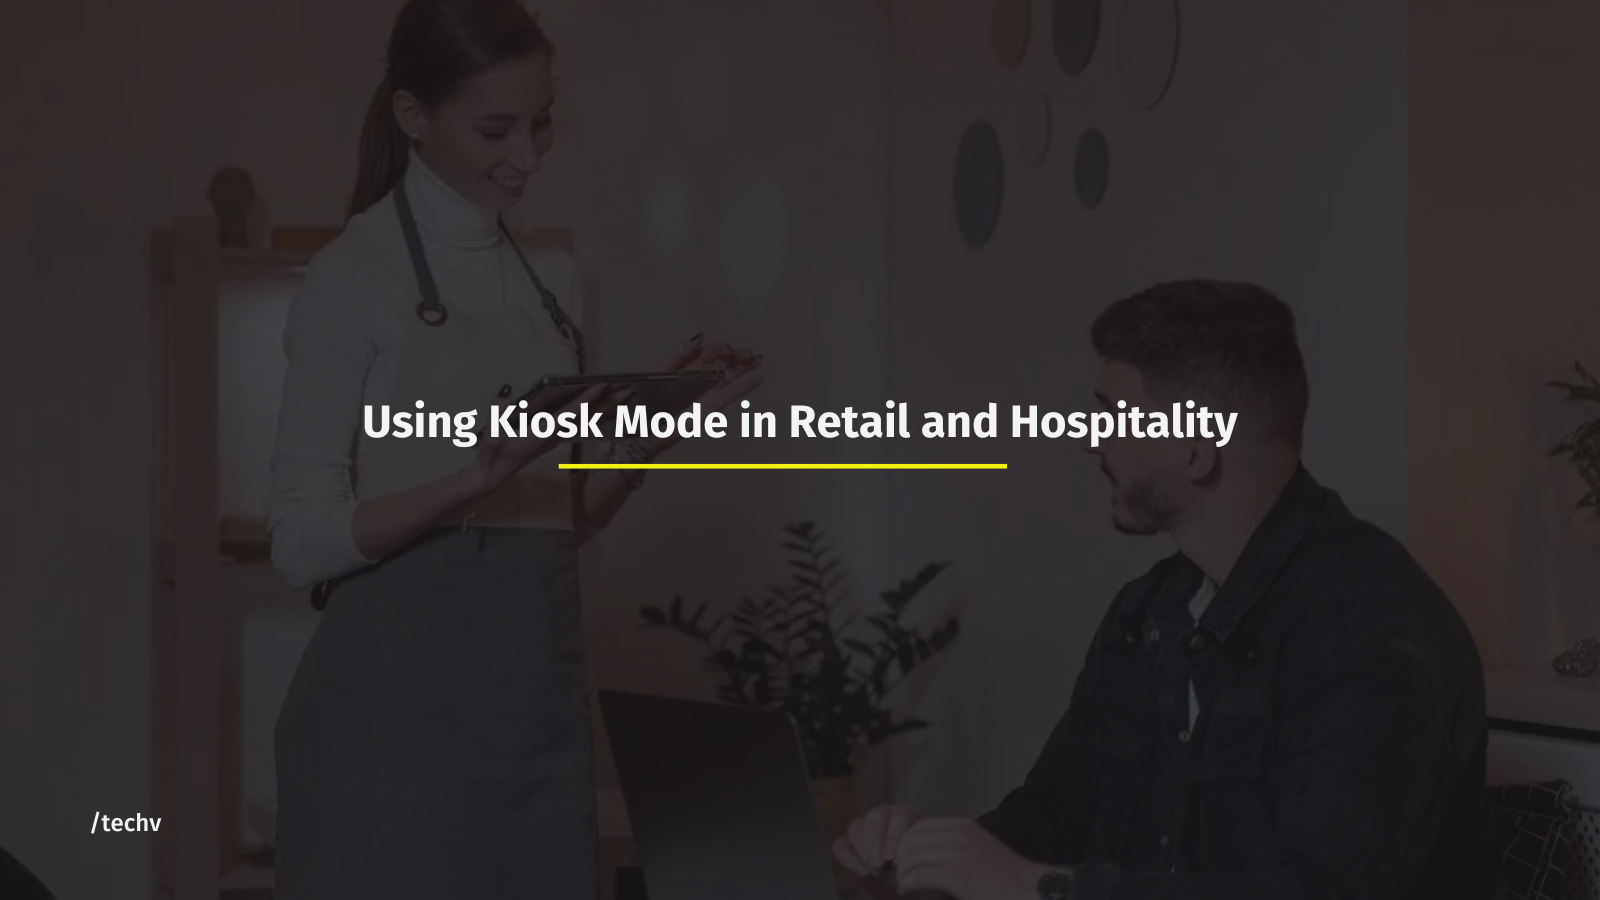 Using Kiosk Mode in Retail and Hospitality: Best PracticesUsing Kiosk Mode in Retail and Hospitality: Best Practices